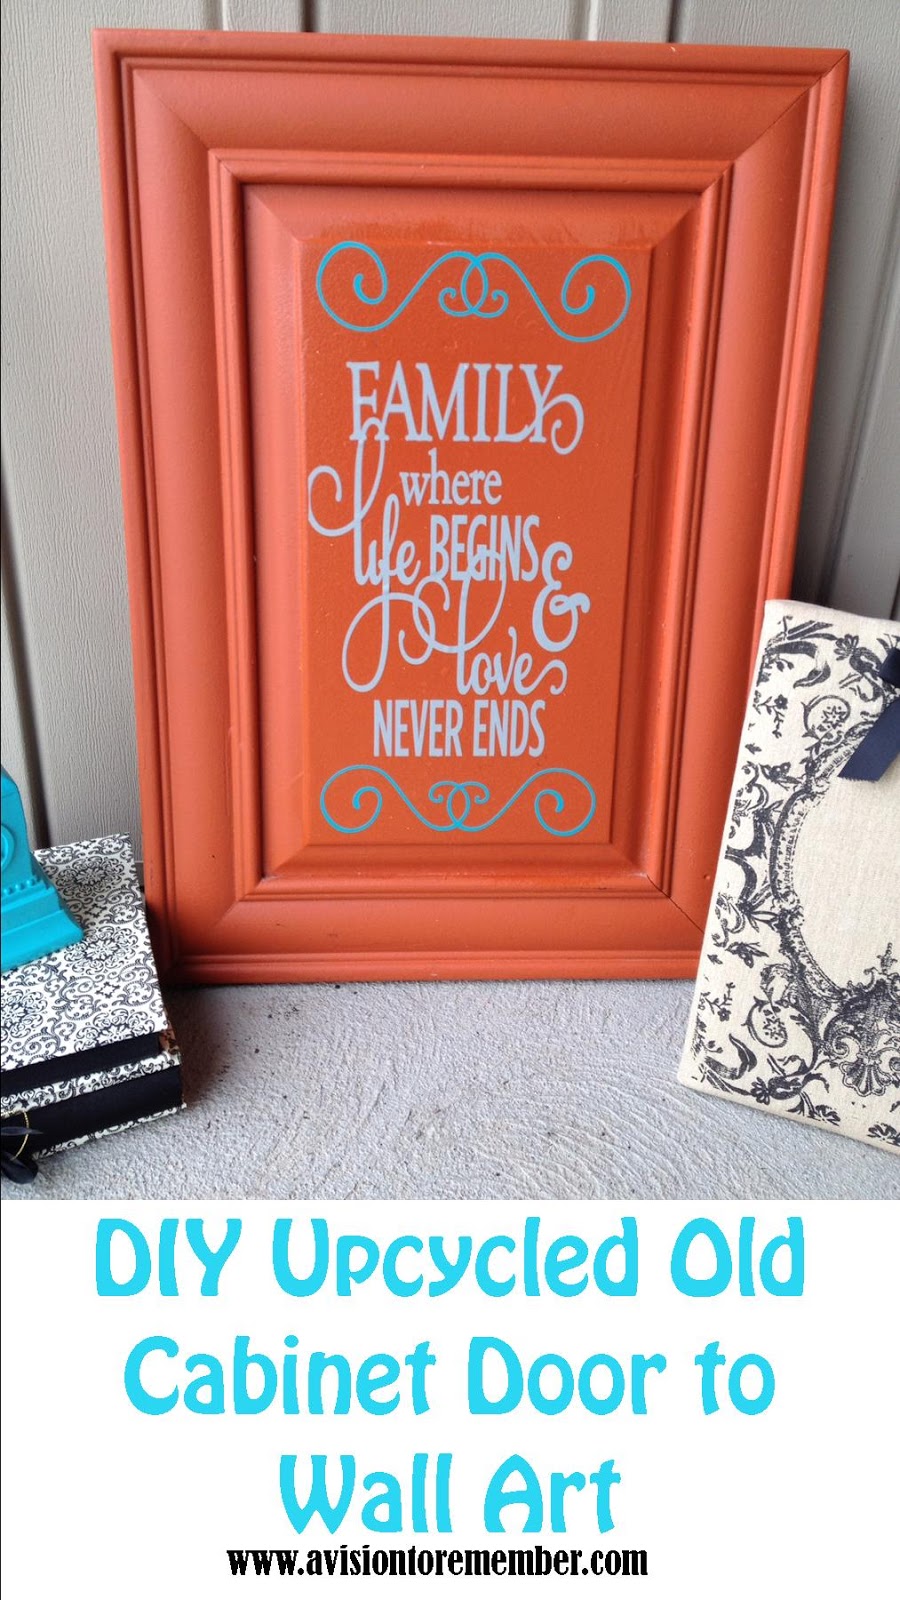 DIY Old Cabinet Door Upcycle to Family Room Wall Art